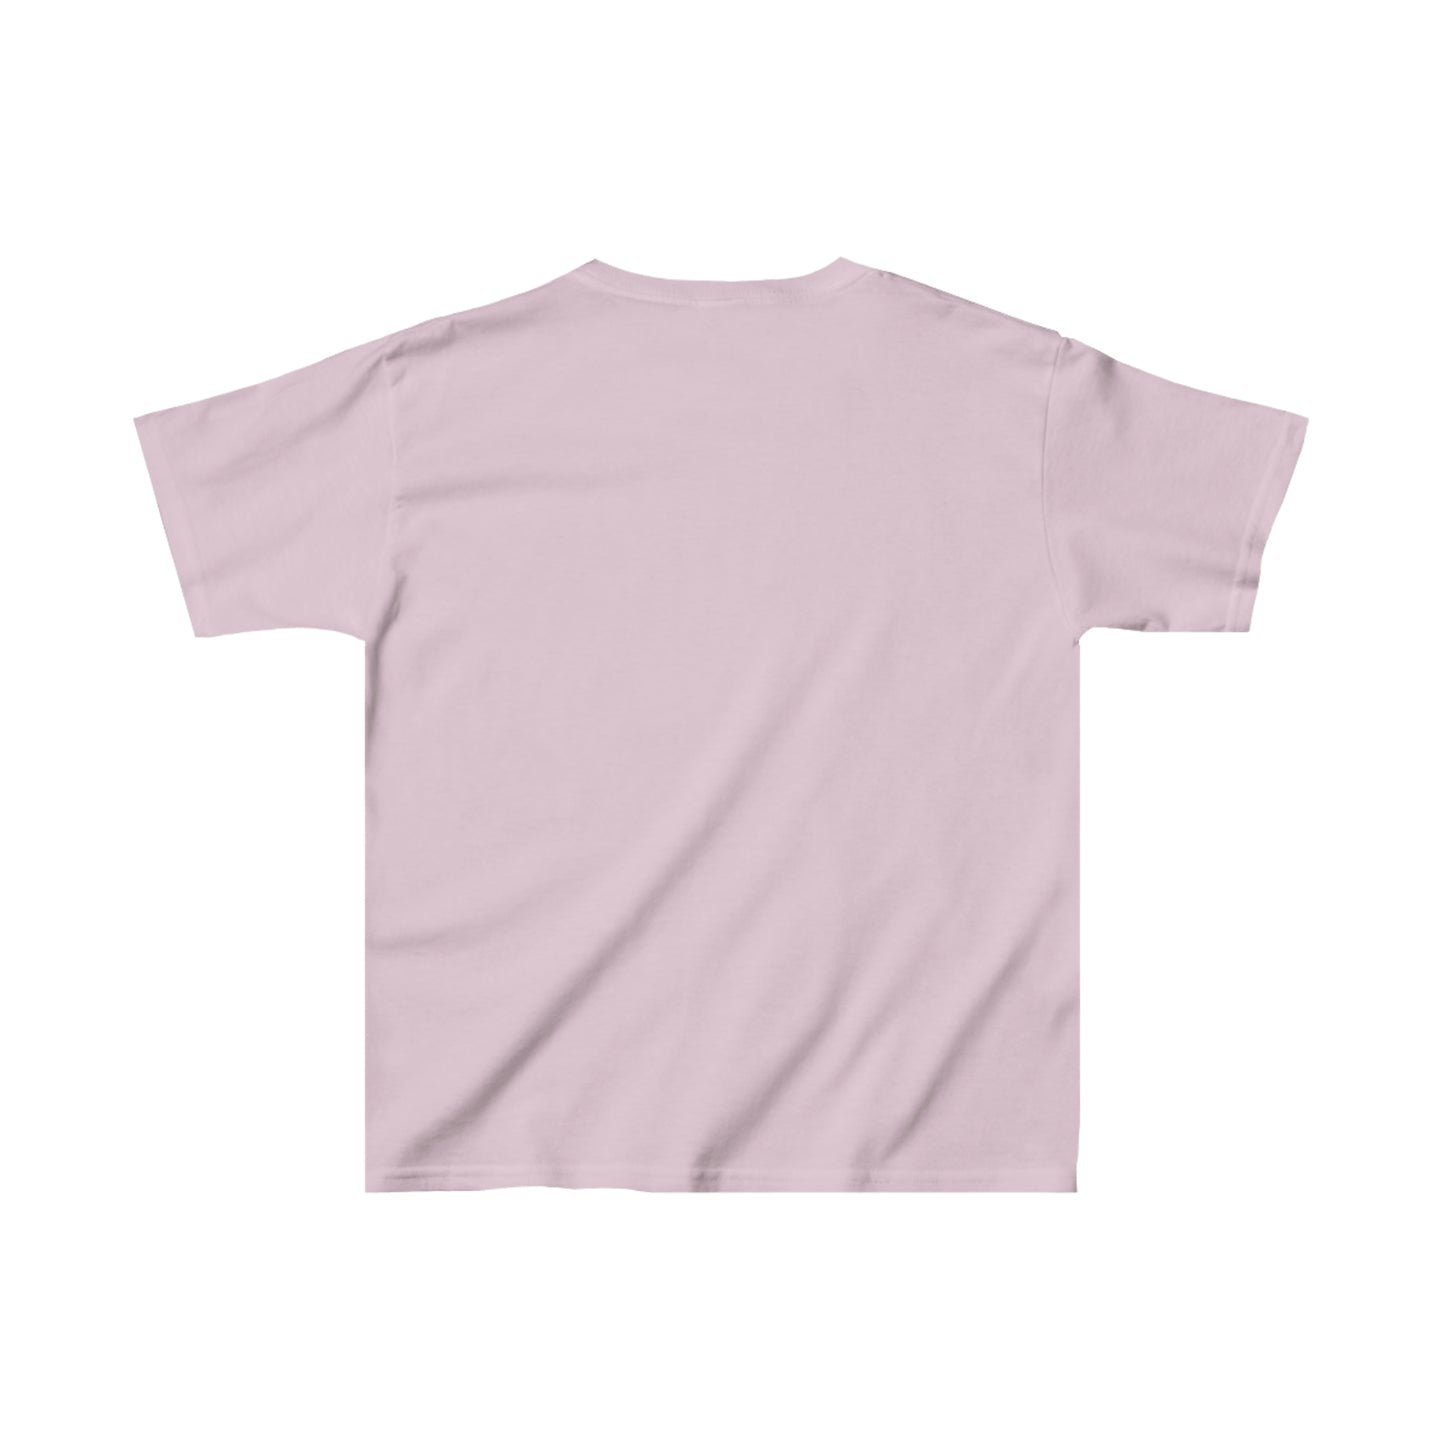 Silly Rabbit Youth Short Sleeve T-Shirt